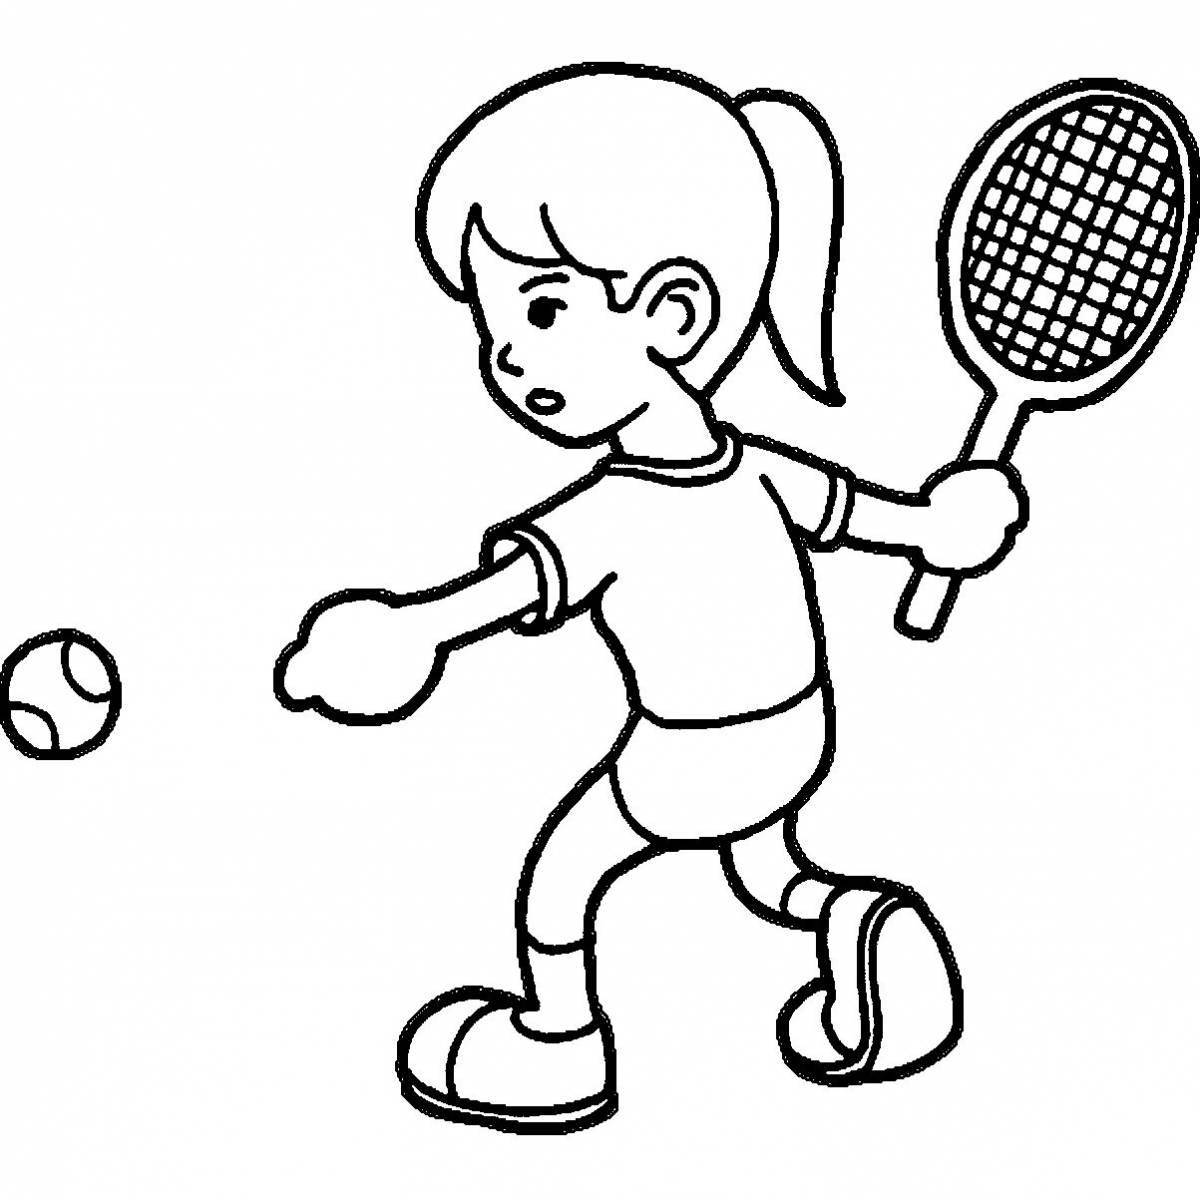 Athletes of different sports for children #8